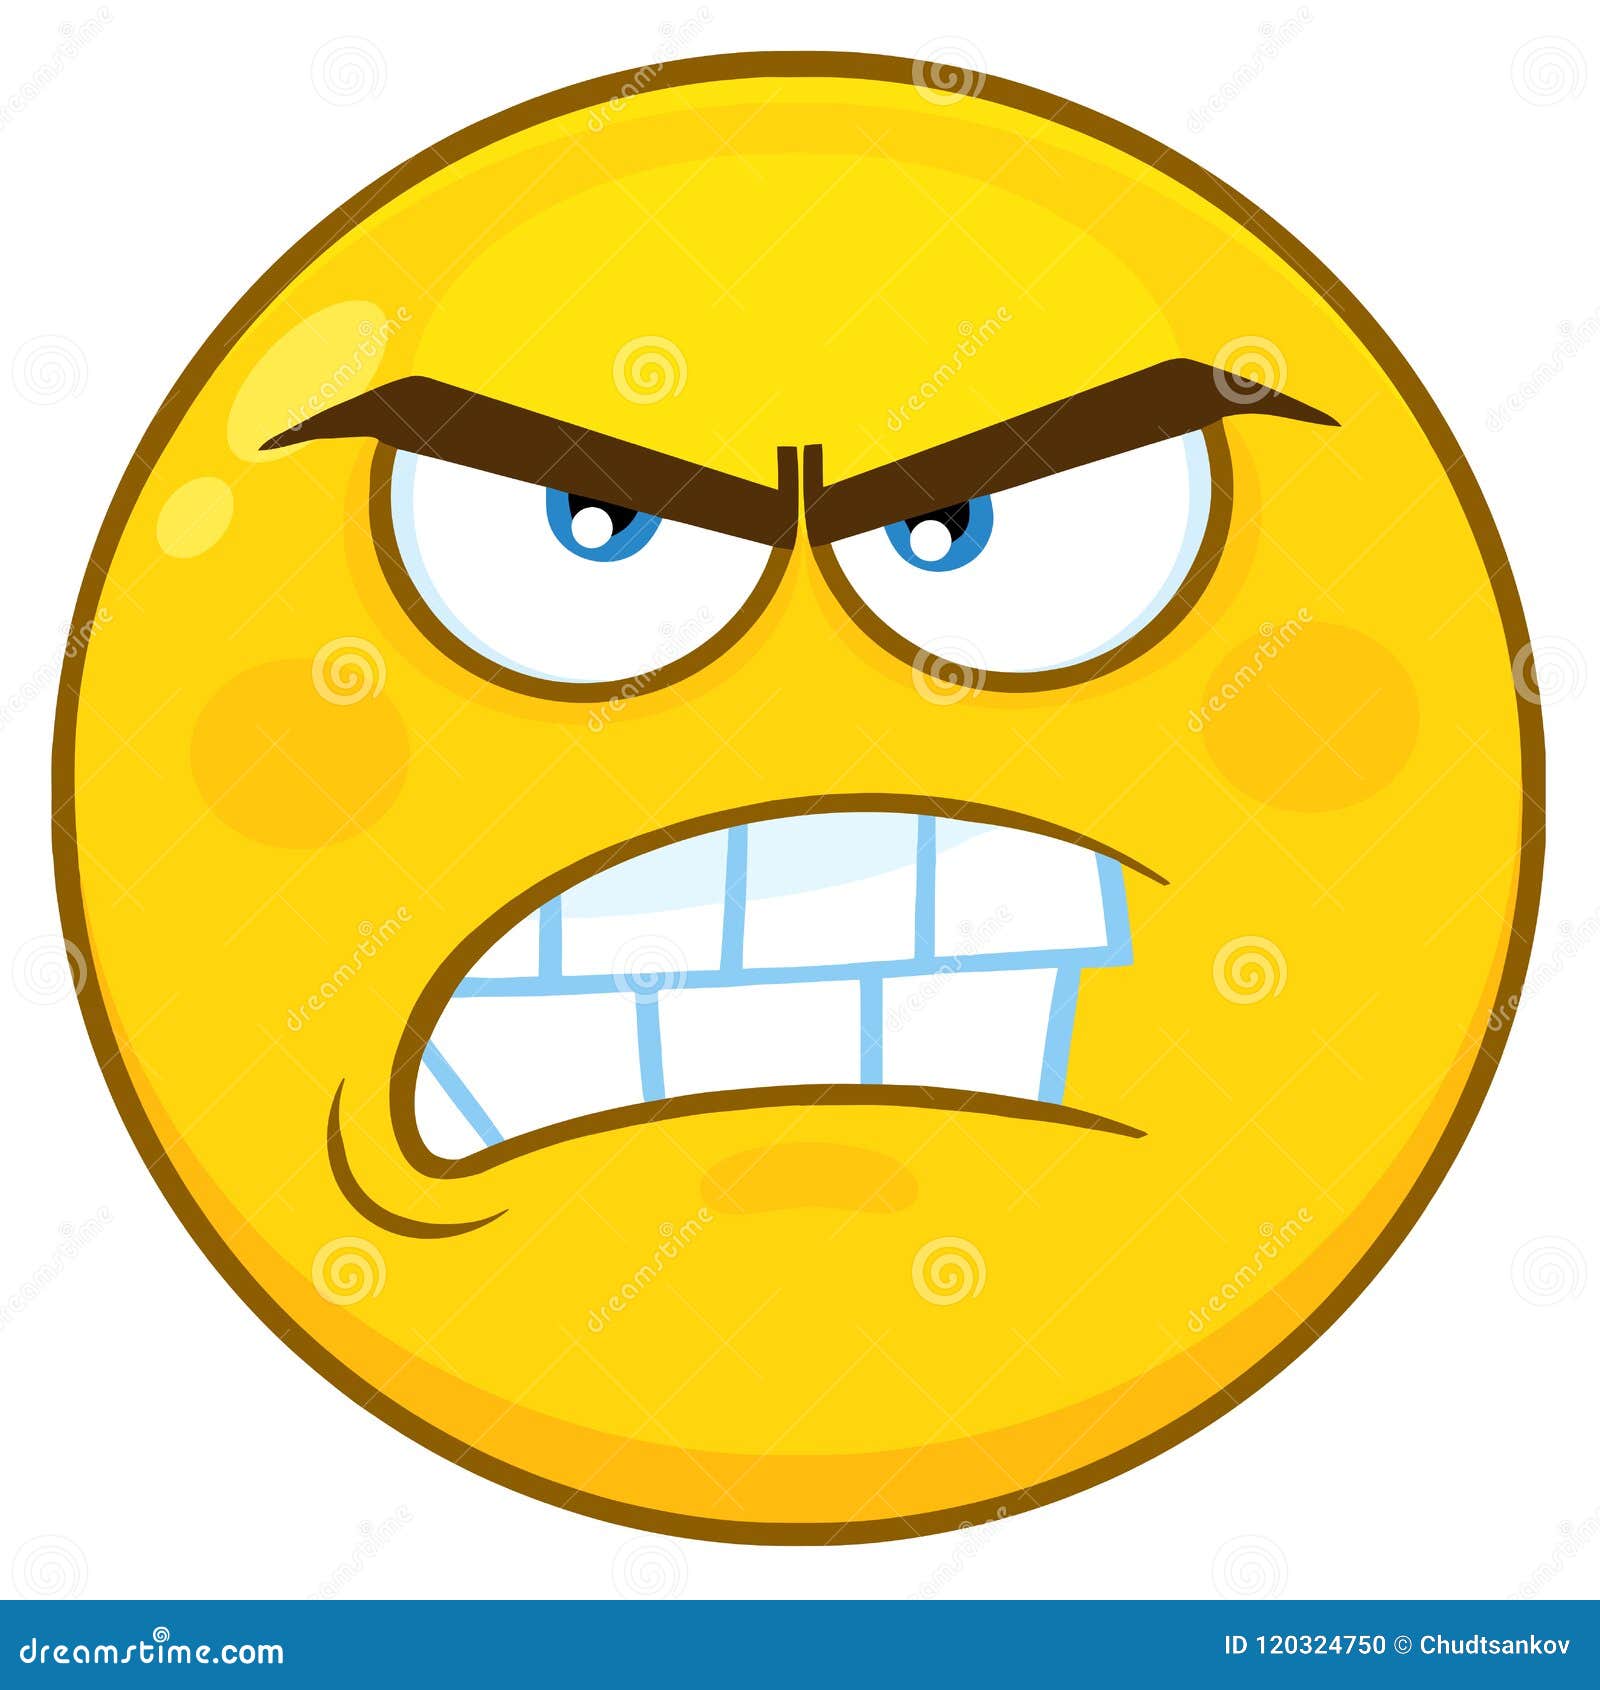 Angry Yellow Cartoon Smiley Face Character with Aggressive Expressions  Stock Vector - Illustration of evil, cartoon: 120324750